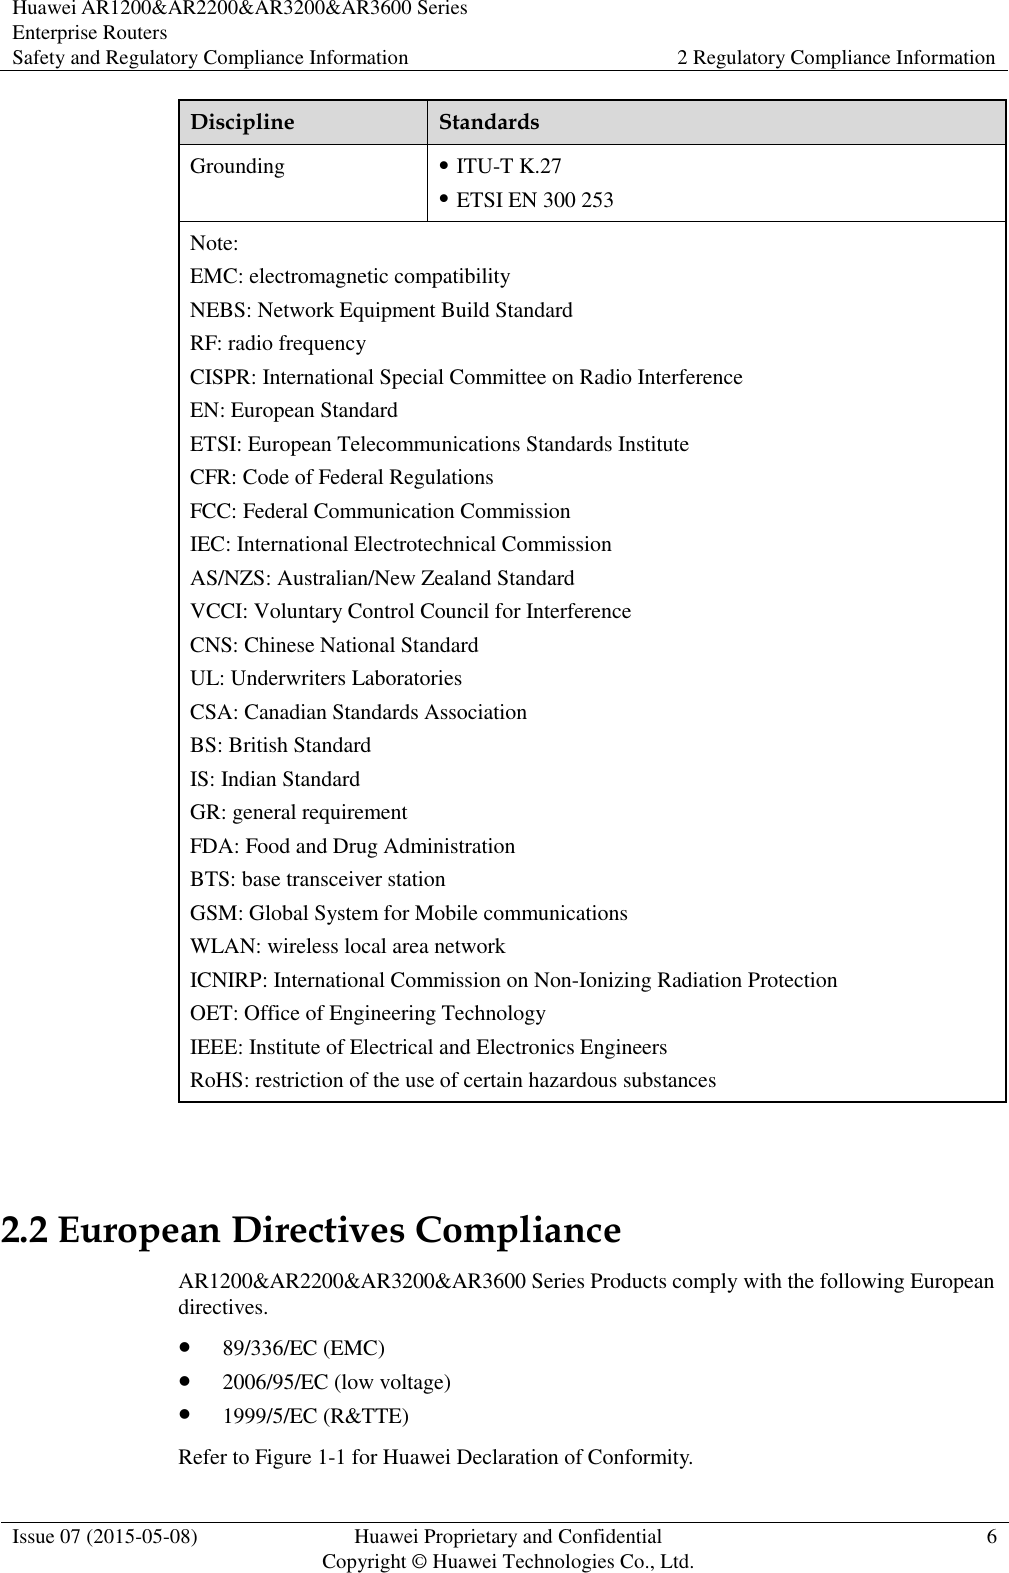 Huawei AR1200&amp;AR2200&amp;AR3200&amp;AR3600 Series Enterprise Routers Safety and Regulatory Compliance Information 2 Regulatory Compliance Information  Issue 07 (2015-05-08) Huawei Proprietary and Confidential           Copyright © Huawei Technologies Co., Ltd. 6  Discipline Standards Grounding  ITU-T K.27  ETSI EN 300 253 Note: EMC: electromagnetic compatibility NEBS: Network Equipment Build Standard RF: radio frequency CISPR: International Special Committee on Radio Interference EN: European Standard ETSI: European Telecommunications Standards Institute CFR: Code of Federal Regulations FCC: Federal Communication Commission IEC: International Electrotechnical Commission AS/NZS: Australian/New Zealand Standard VCCI: Voluntary Control Council for Interference CNS: Chinese National Standard UL: Underwriters Laboratories CSA: Canadian Standards Association BS: British Standard IS: Indian Standard GR: general requirement FDA: Food and Drug Administration BTS: base transceiver station GSM: Global System for Mobile communications WLAN: wireless local area network ICNIRP: International Commission on Non-Ionizing Radiation Protection OET: Office of Engineering Technology IEEE: Institute of Electrical and Electronics Engineers RoHS: restriction of the use of certain hazardous substances  2.2 European Directives Compliance AR1200&amp;AR2200&amp;AR3200&amp;AR3600 Series Products comply with the following European directives.    89/336/EC (EMC)  2006/95/EC (low voltage)  1999/5/EC (R&amp;TTE) Refer to Figure 1-1 for Huawei Declaration of Conformity. 